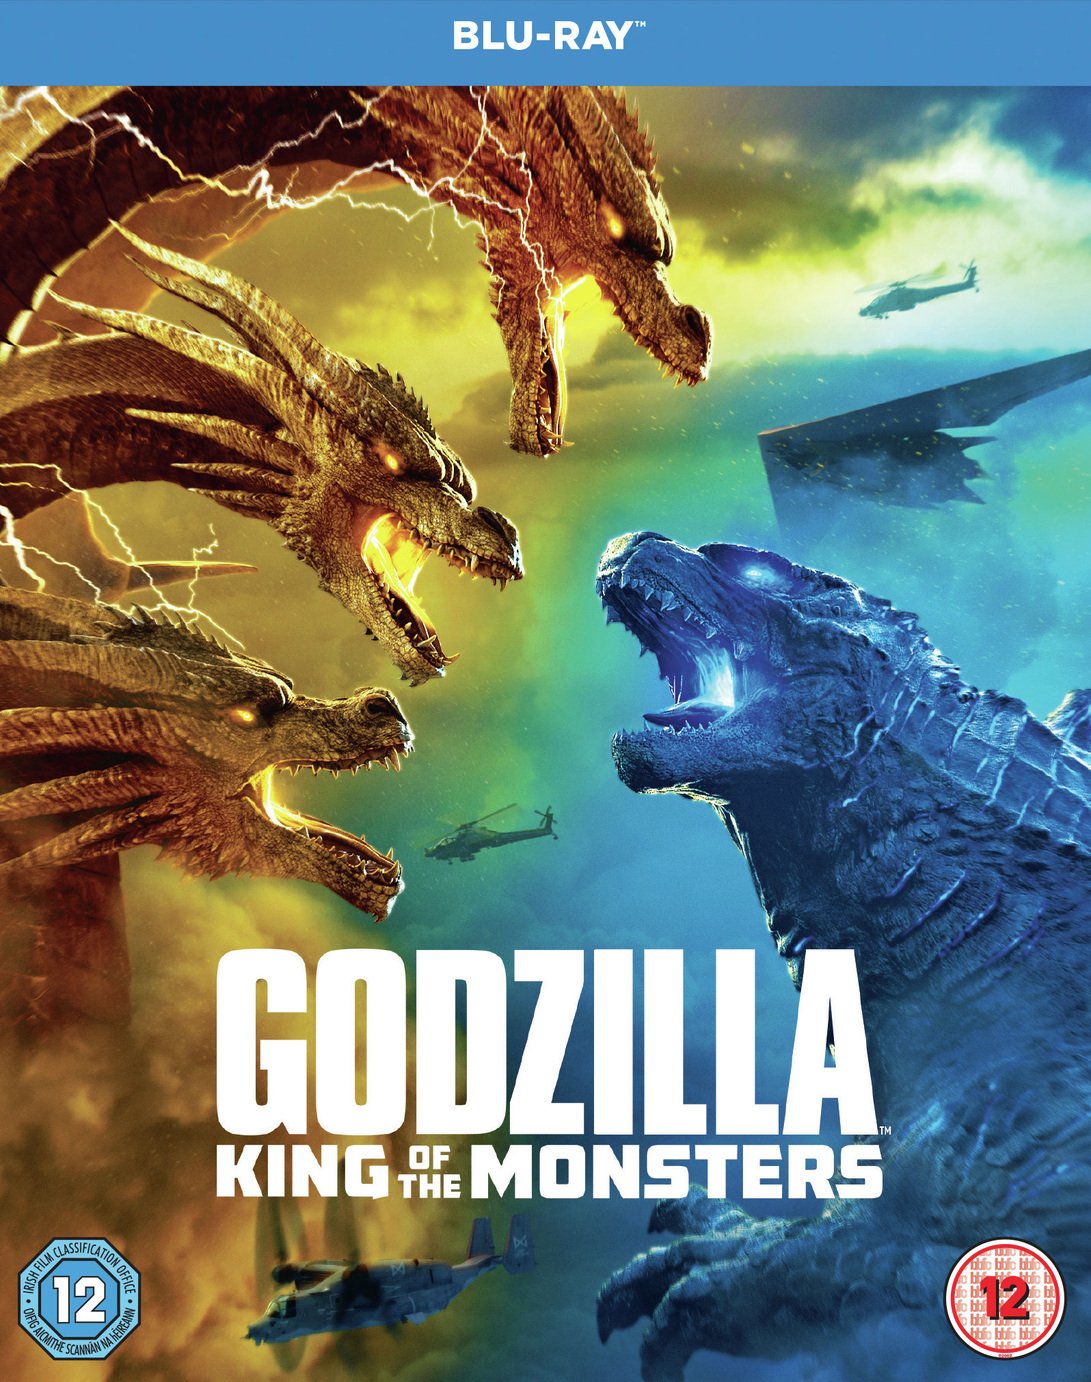 Godzilla: King of the Monsters Blu-ray Review